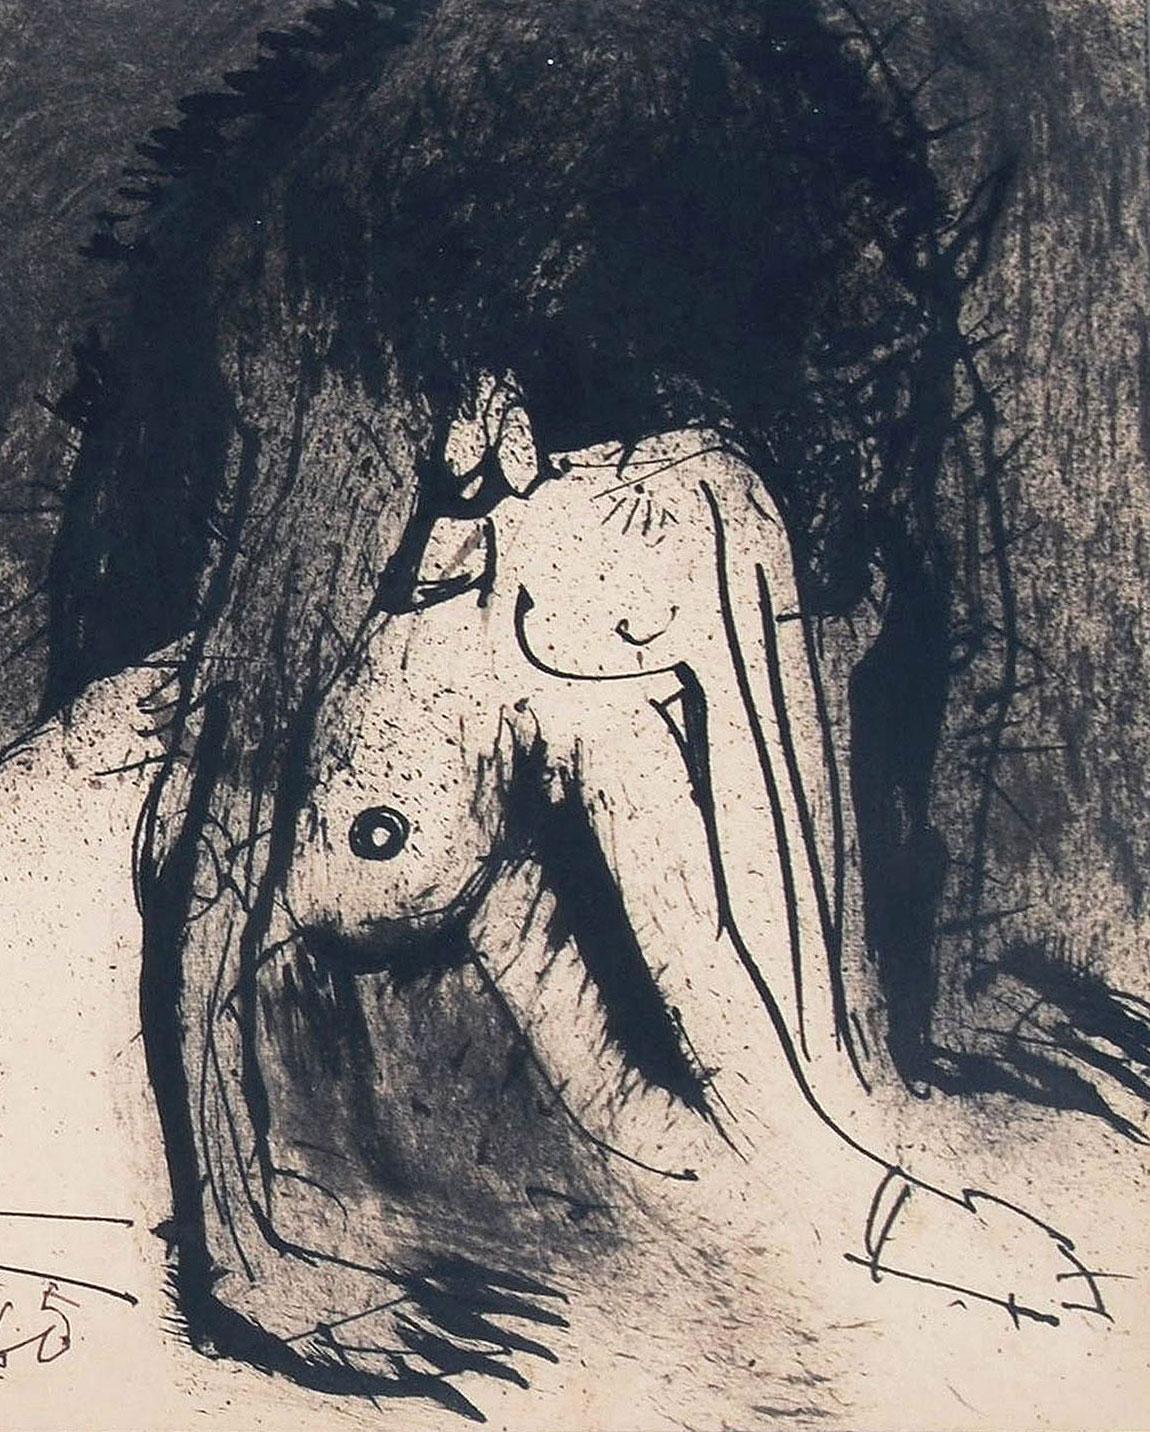 Sunil Das - Untitled - 8.5 x 7 inches (unframed size)
Ink &Charcoal on paper
Inclusive of shipment in ready to hang form.

In the sixties Sunil's art was often seen to feature a dialogic discourse between the figurative and abstract. This is evident